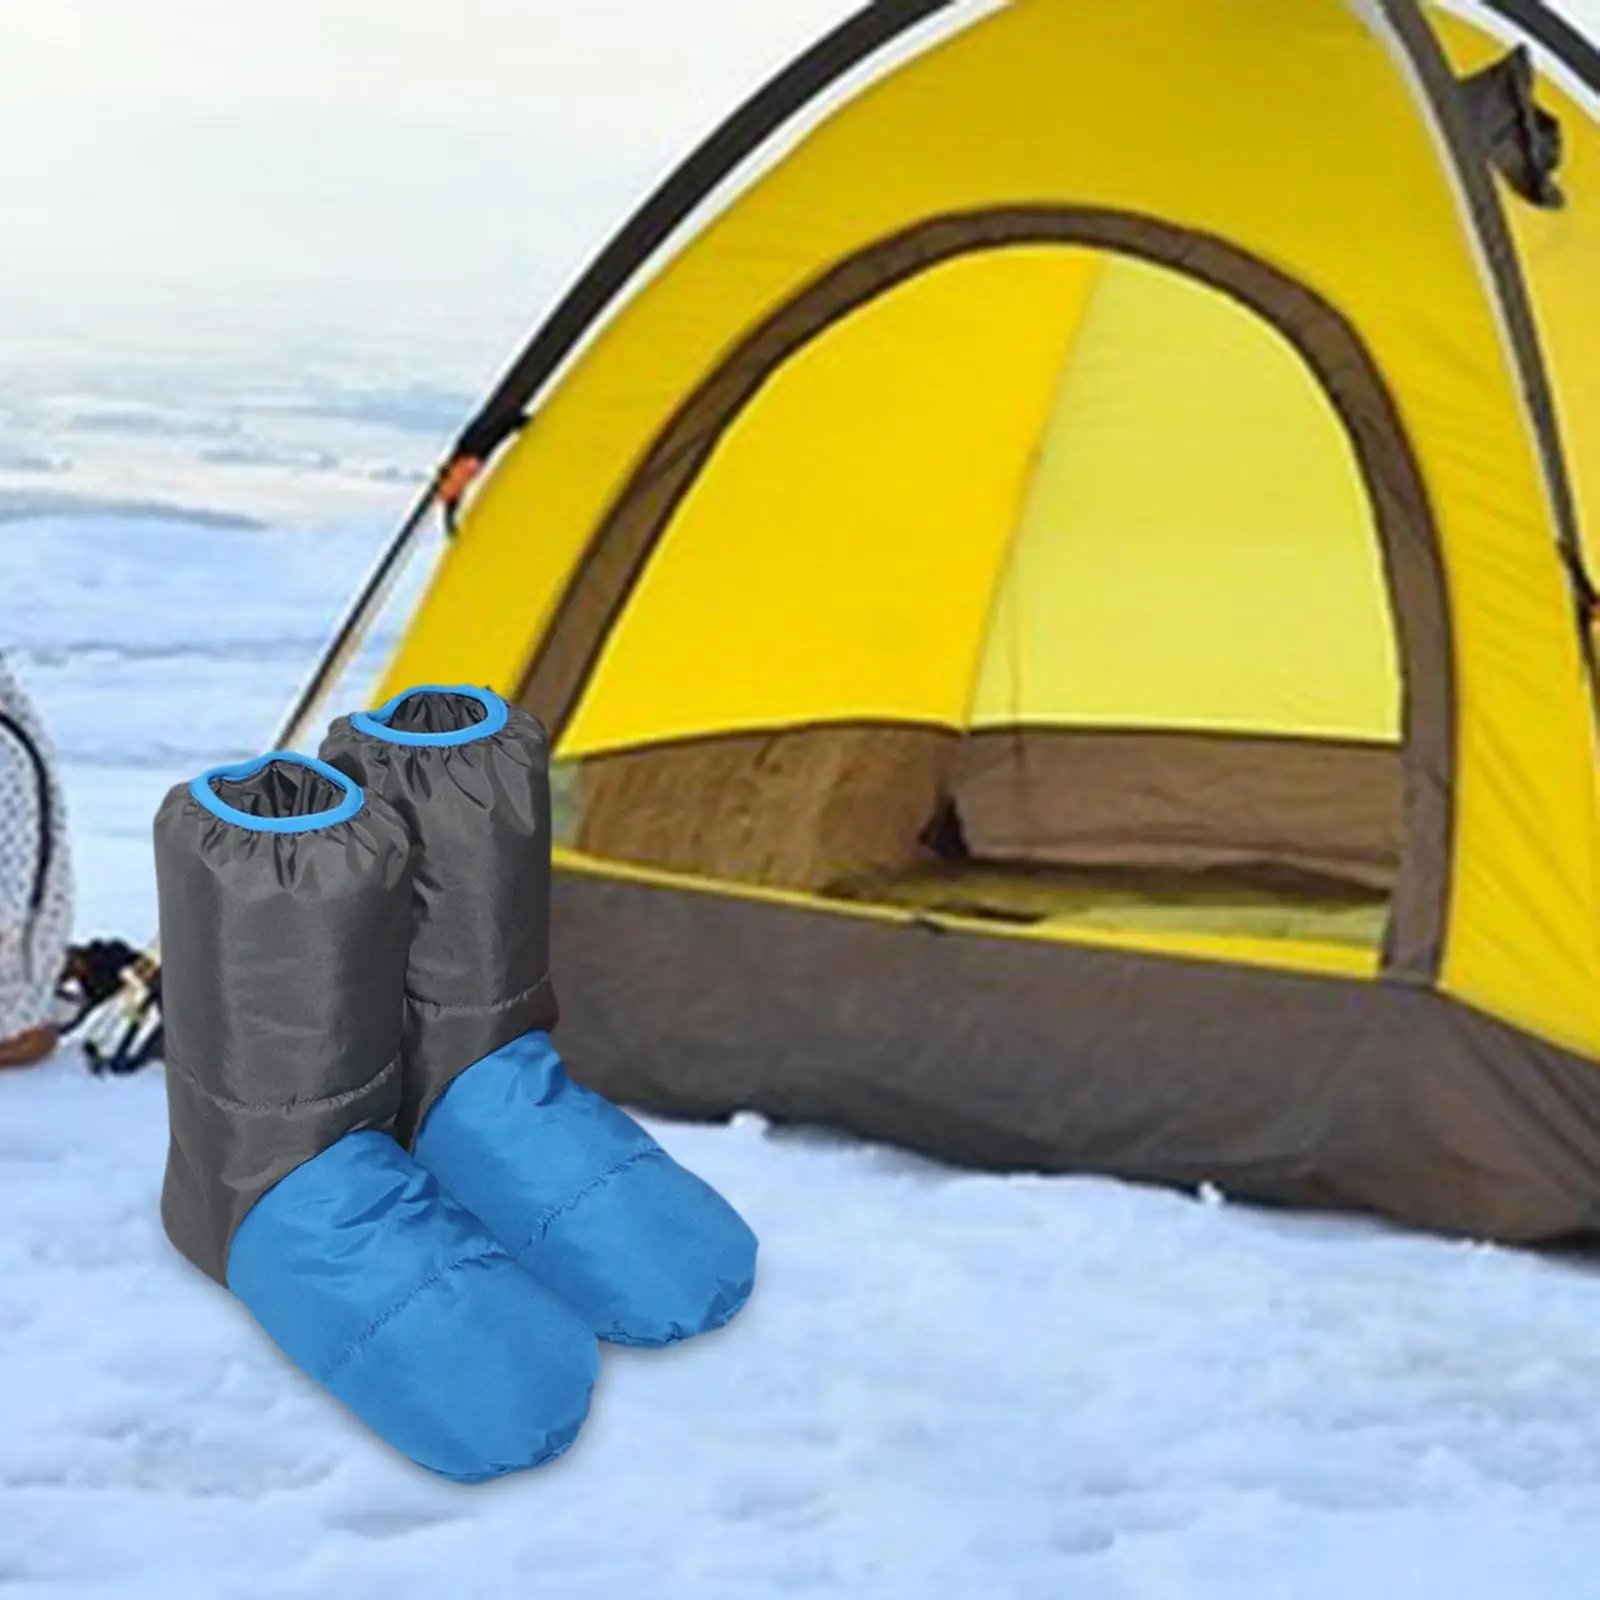 Down Booties Down Slipper Boots Down Shoes Non Slip Sleeping Slippers Warm Socks for Camping Fishing Men Women Tent